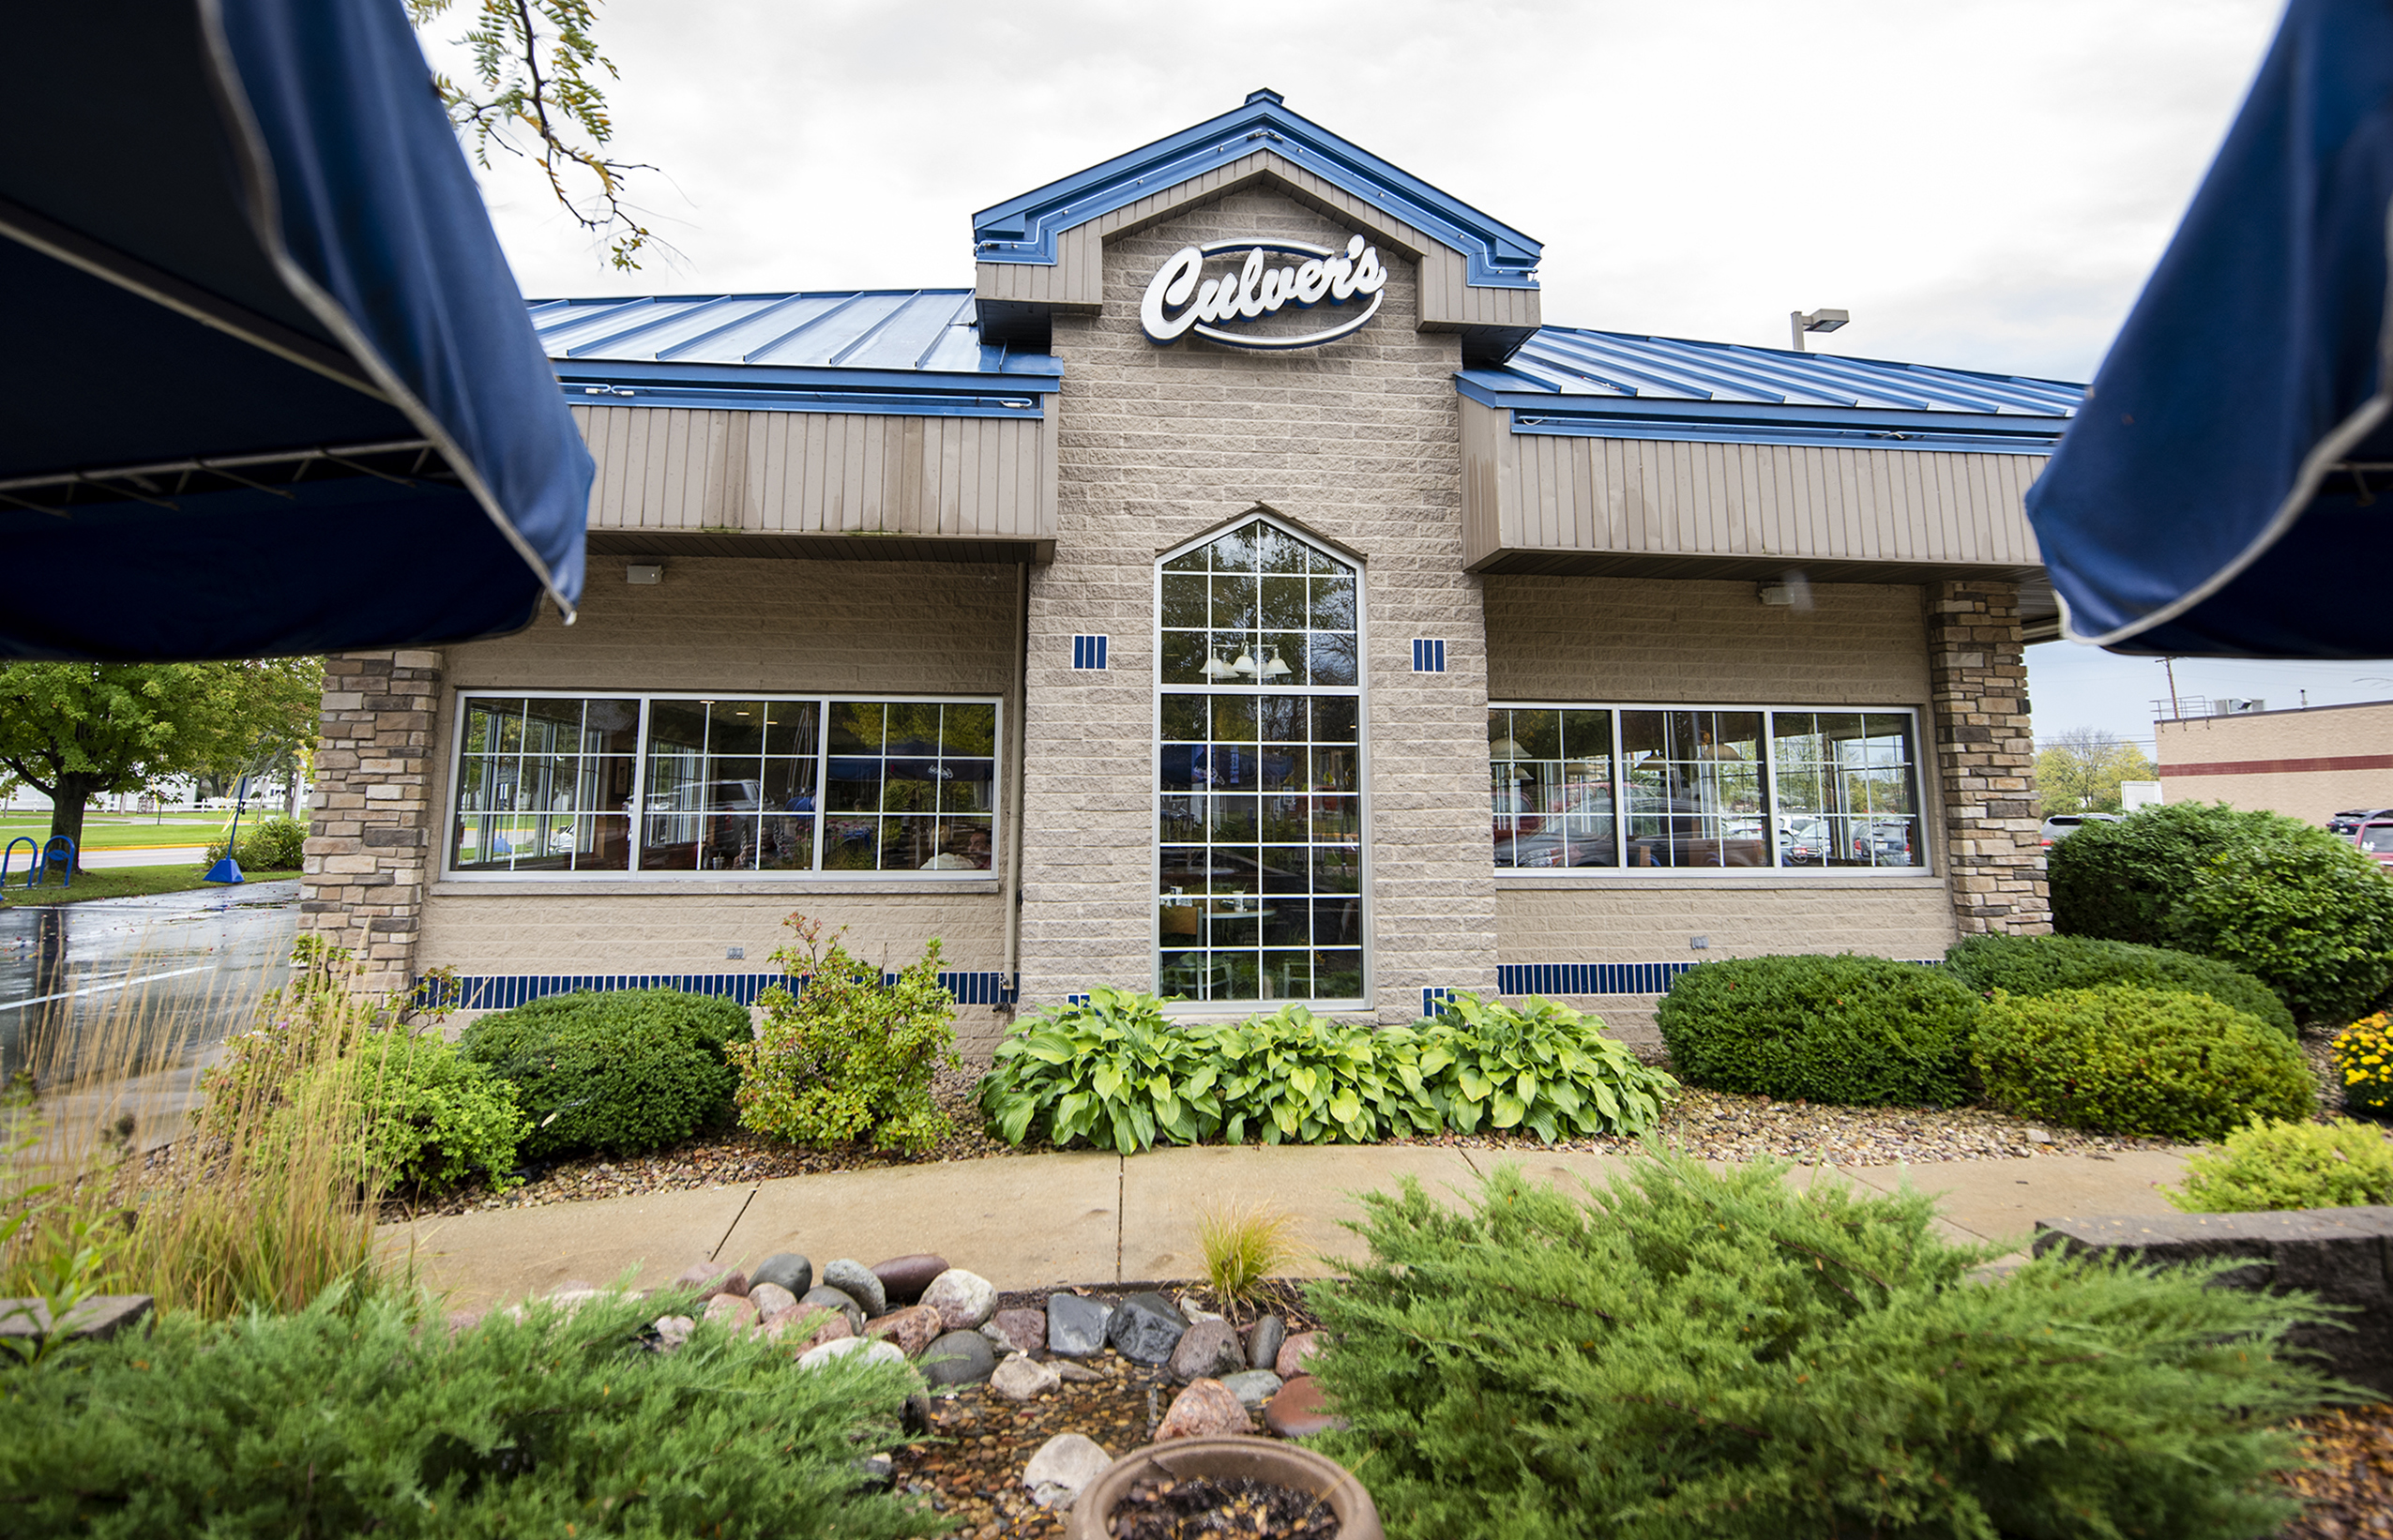 Culver’s celebrates 40 years of business